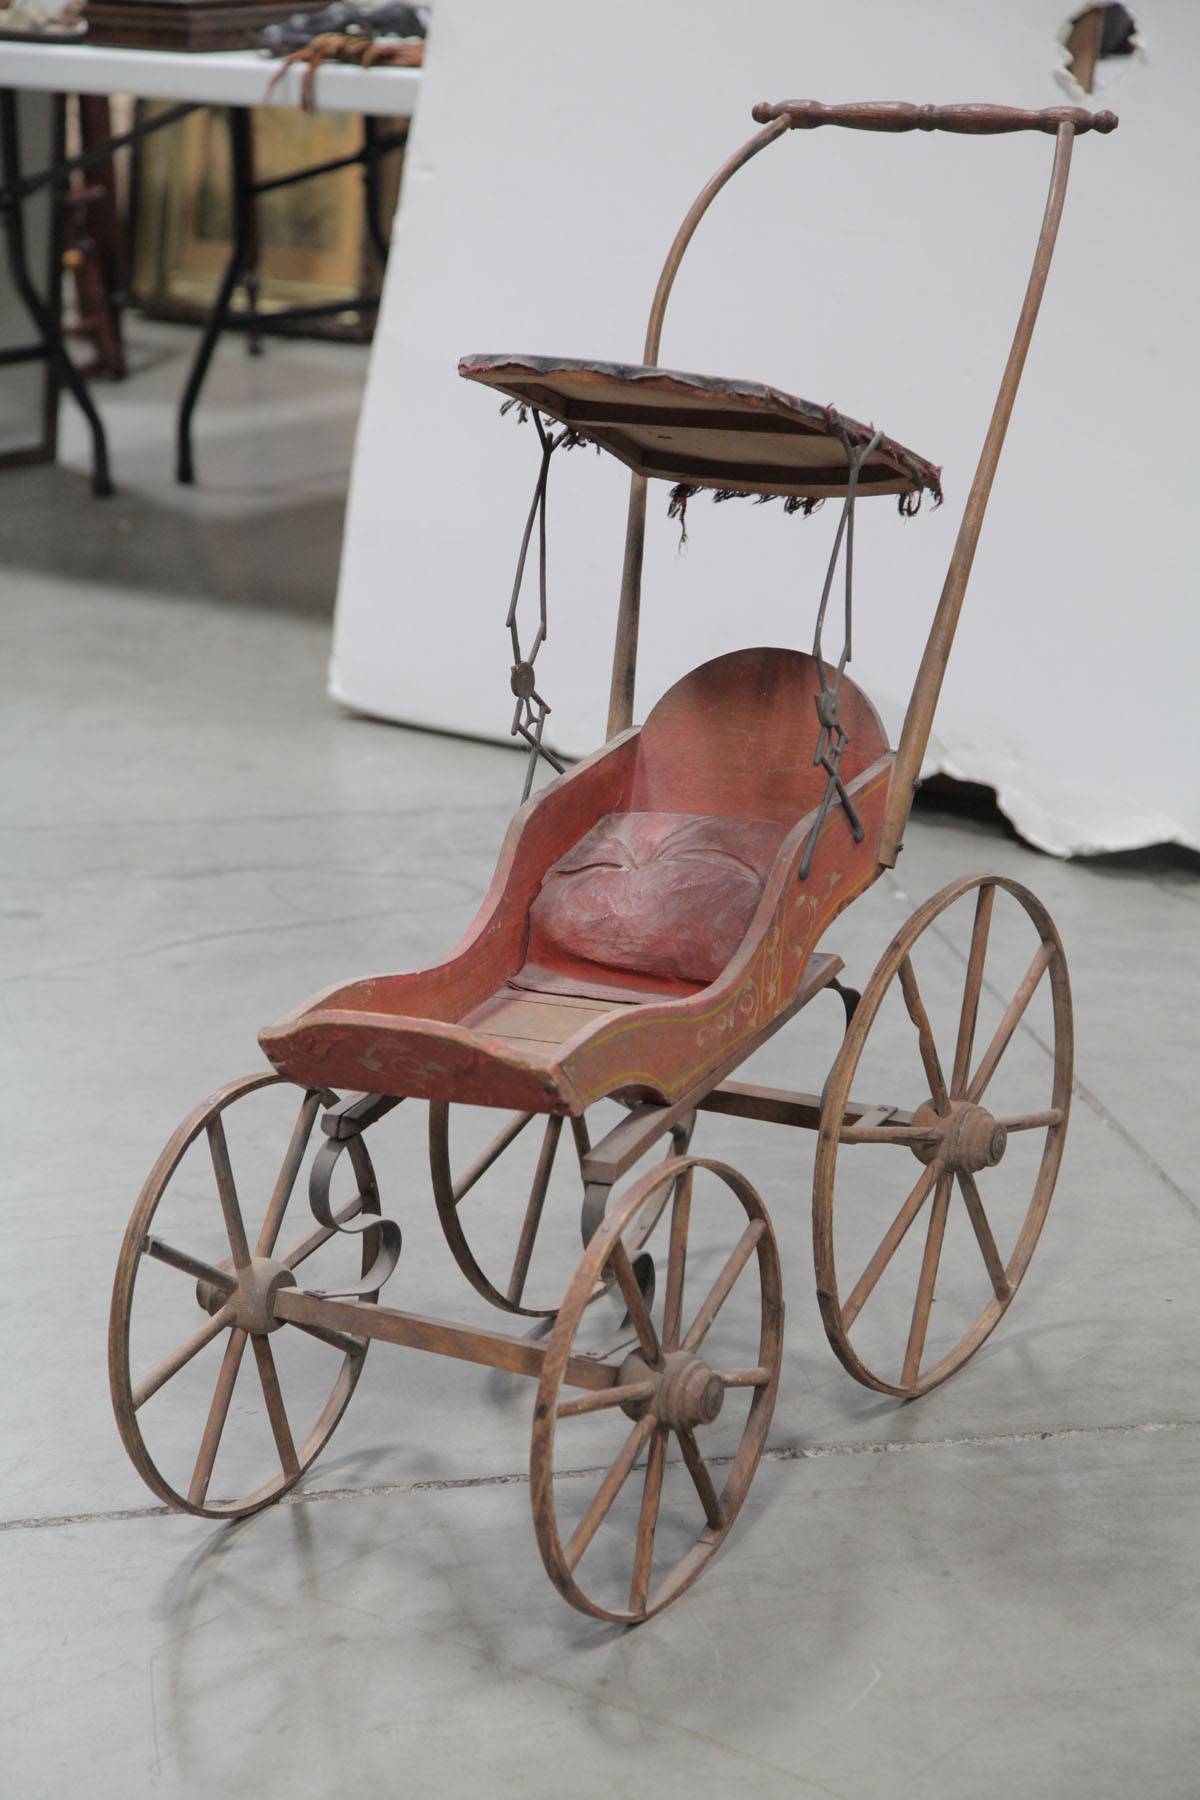 WOODEN DOLL BUGGY.  American  early